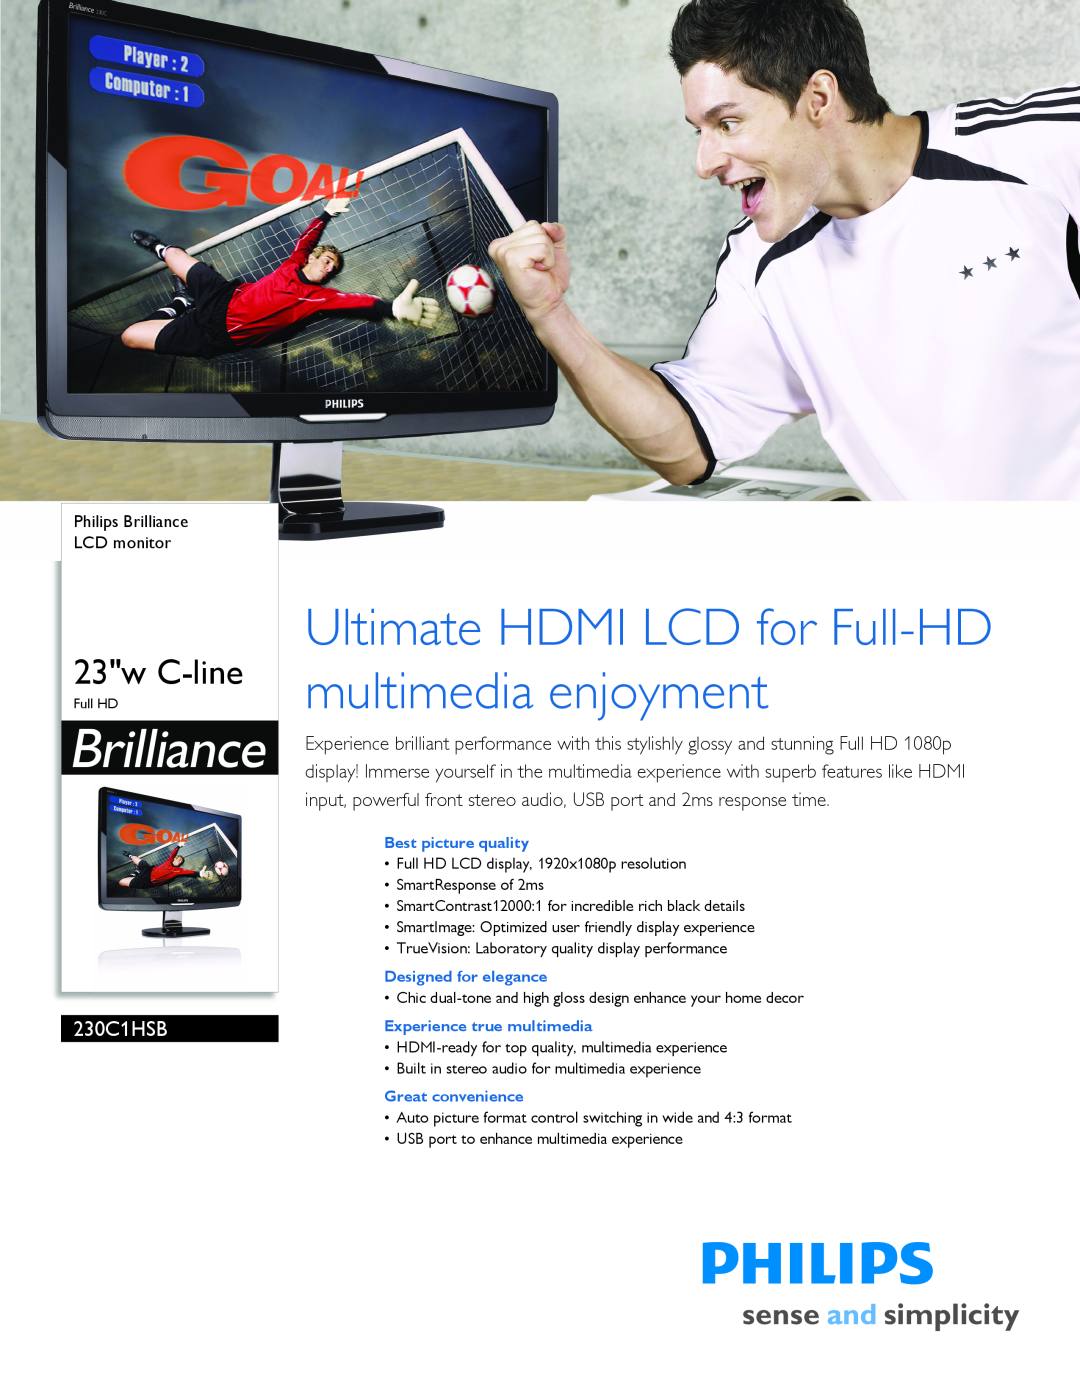 Philips 230C1HSB manual Philips Brilliance LCD monitor, Best picture quality, Designed for elegance, Great convenience 